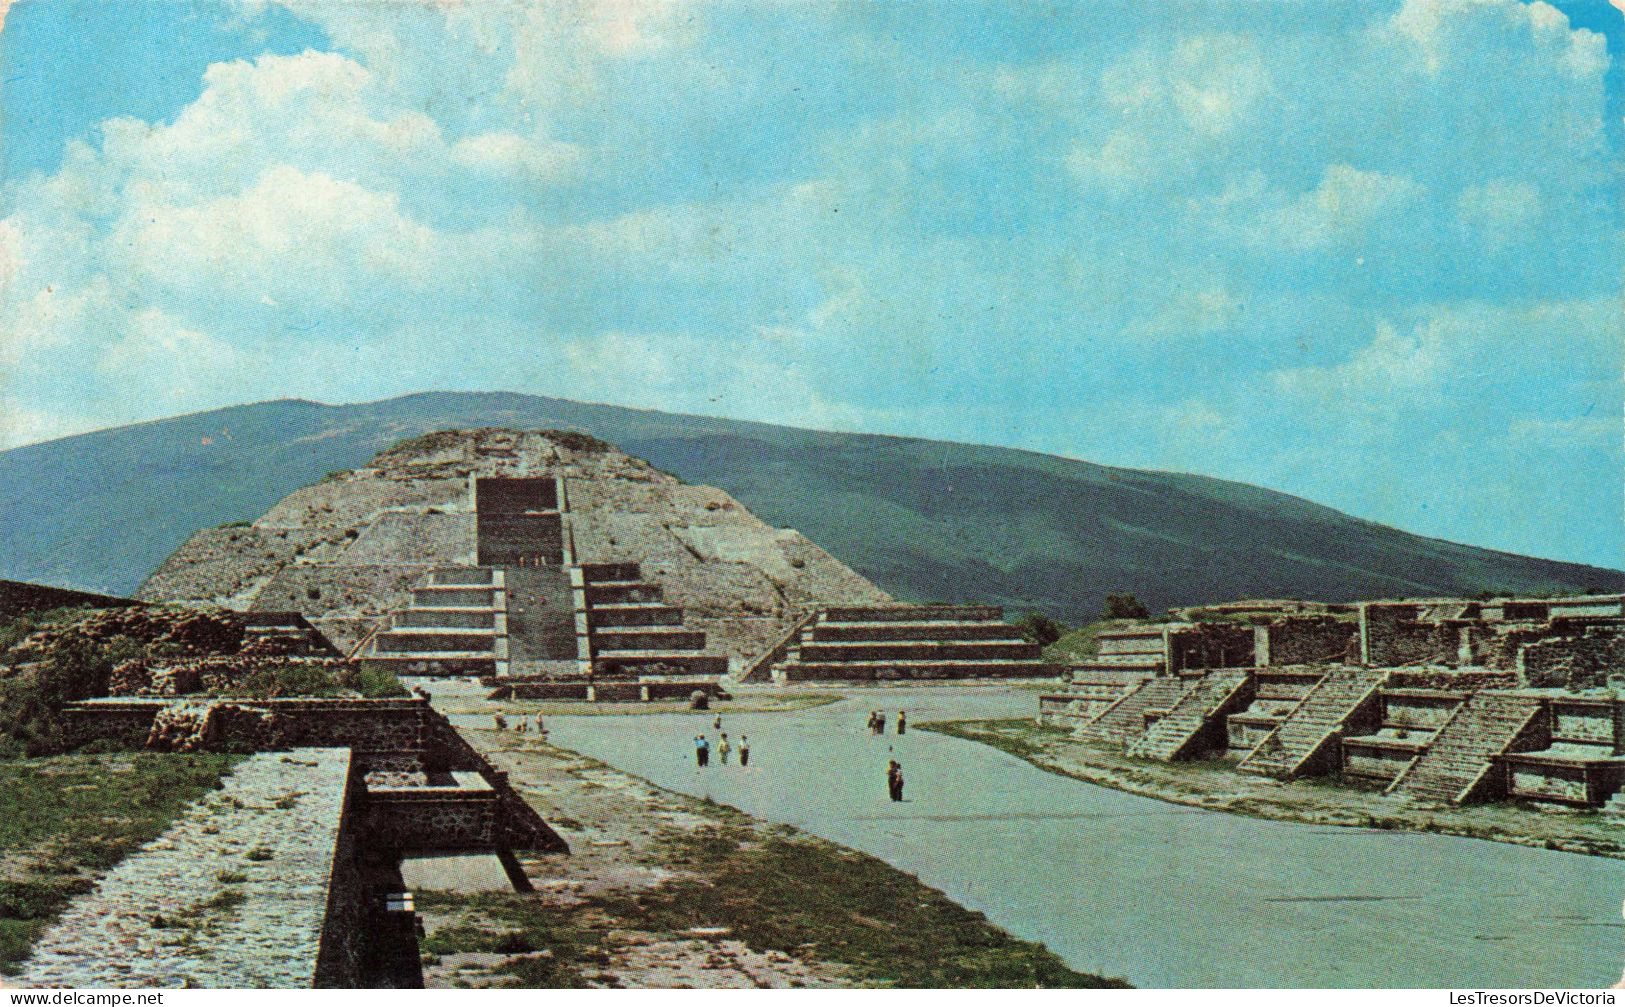 MEXICO - The Moon Pyramid At The Back - Colorisé - Carte Postale Ancienne - Mexico